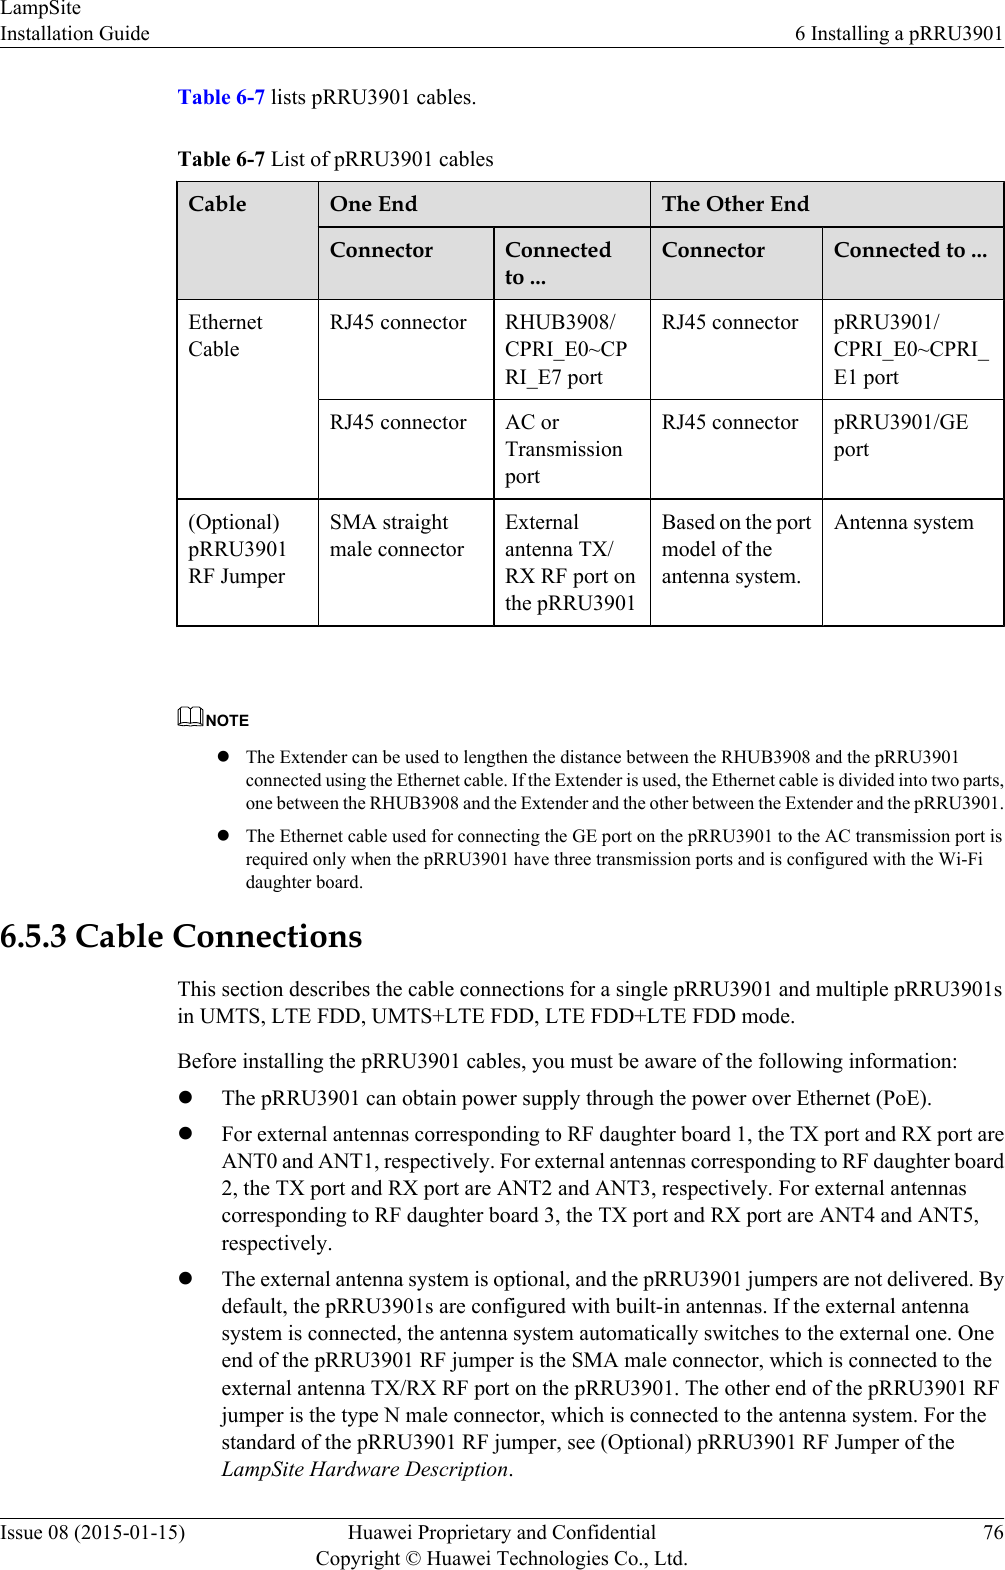 Table 6-7 lists pRRU3901 cables.Table 6-7 List of pRRU3901 cablesCable One End The Other EndConnector Connectedto ...Connector Connected to ...EthernetCableRJ45 connector RHUB3908/CPRI_E0~CPRI_E7 portRJ45 connector pRRU3901/CPRI_E0~CPRI_E1 portRJ45 connector AC orTransmissionportRJ45 connector pRRU3901/GEport(Optional)pRRU3901RF JumperSMA straightmale connectorExternalantenna TX/RX RF port onthe pRRU3901Based on the portmodel of theantenna system.Antenna system NOTElThe Extender can be used to lengthen the distance between the RHUB3908 and the pRRU3901connected using the Ethernet cable. If the Extender is used, the Ethernet cable is divided into two parts,one between the RHUB3908 and the Extender and the other between the Extender and the pRRU3901.lThe Ethernet cable used for connecting the GE port on the pRRU3901 to the AC transmission port isrequired only when the pRRU3901 have three transmission ports and is configured with the Wi-Fidaughter board.6.5.3 Cable ConnectionsThis section describes the cable connections for a single pRRU3901 and multiple pRRU3901sin UMTS, LTE FDD, UMTS+LTE FDD, LTE FDD+LTE FDD mode.Before installing the pRRU3901 cables, you must be aware of the following information:lThe pRRU3901 can obtain power supply through the power over Ethernet (PoE).lFor external antennas corresponding to RF daughter board 1, the TX port and RX port areANT0 and ANT1, respectively. For external antennas corresponding to RF daughter board2, the TX port and RX port are ANT2 and ANT3, respectively. For external antennascorresponding to RF daughter board 3, the TX port and RX port are ANT4 and ANT5,respectively.lThe external antenna system is optional, and the pRRU3901 jumpers are not delivered. Bydefault, the pRRU3901s are configured with built-in antennas. If the external antennasystem is connected, the antenna system automatically switches to the external one. Oneend of the pRRU3901 RF jumper is the SMA male connector, which is connected to theexternal antenna TX/RX RF port on the pRRU3901. The other end of the pRRU3901 RFjumper is the type N male connector, which is connected to the antenna system. For thestandard of the pRRU3901 RF jumper, see (Optional) pRRU3901 RF Jumper of theLampSite Hardware Description.LampSiteInstallation Guide 6 Installing a pRRU3901Issue 08 (2015-01-15) Huawei Proprietary and ConfidentialCopyright © Huawei Technologies Co., Ltd.76